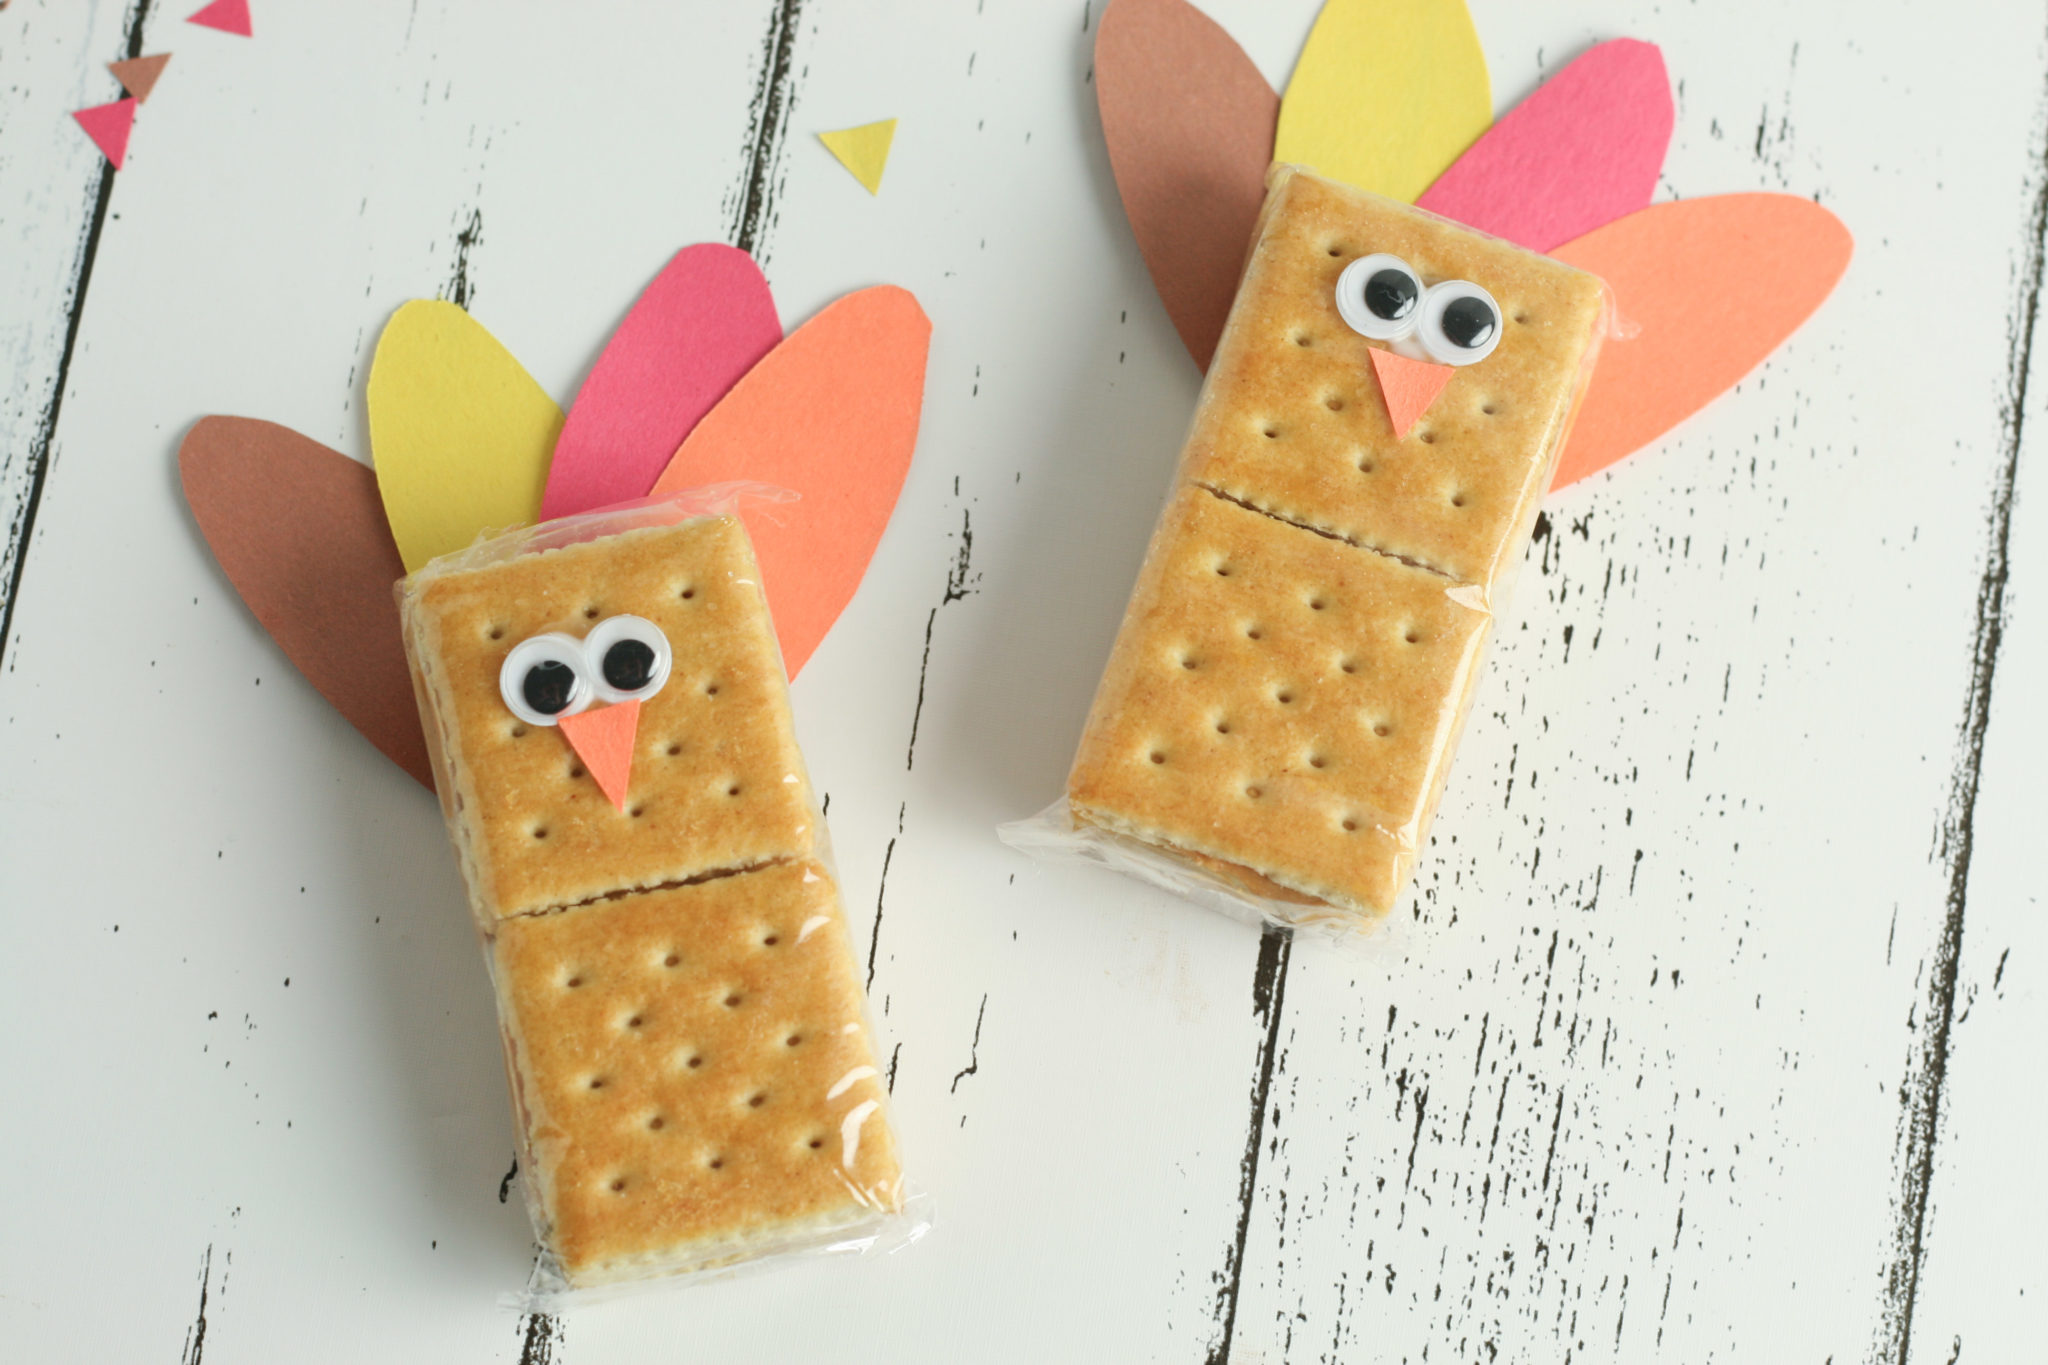 Thanksgiving turkey cracker snacks are easy to make and fun for everyone!